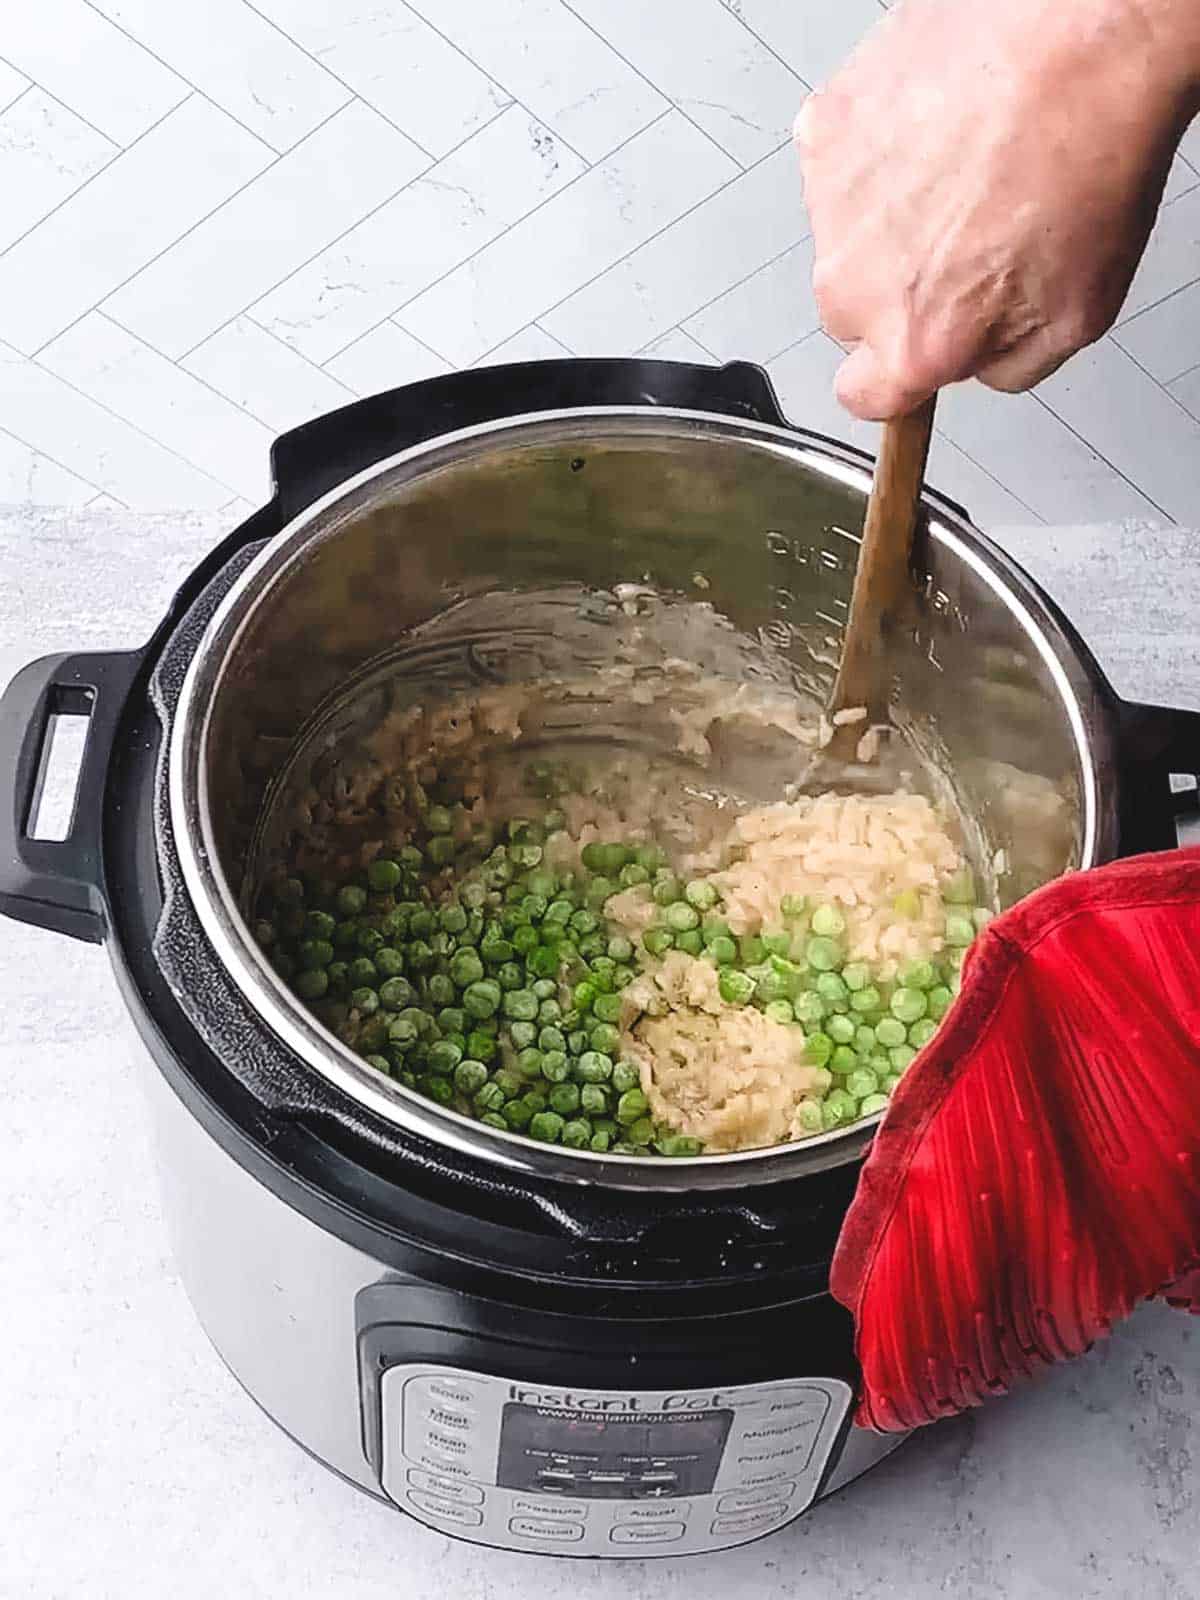 Stirring the green peas in the risotto mixture.